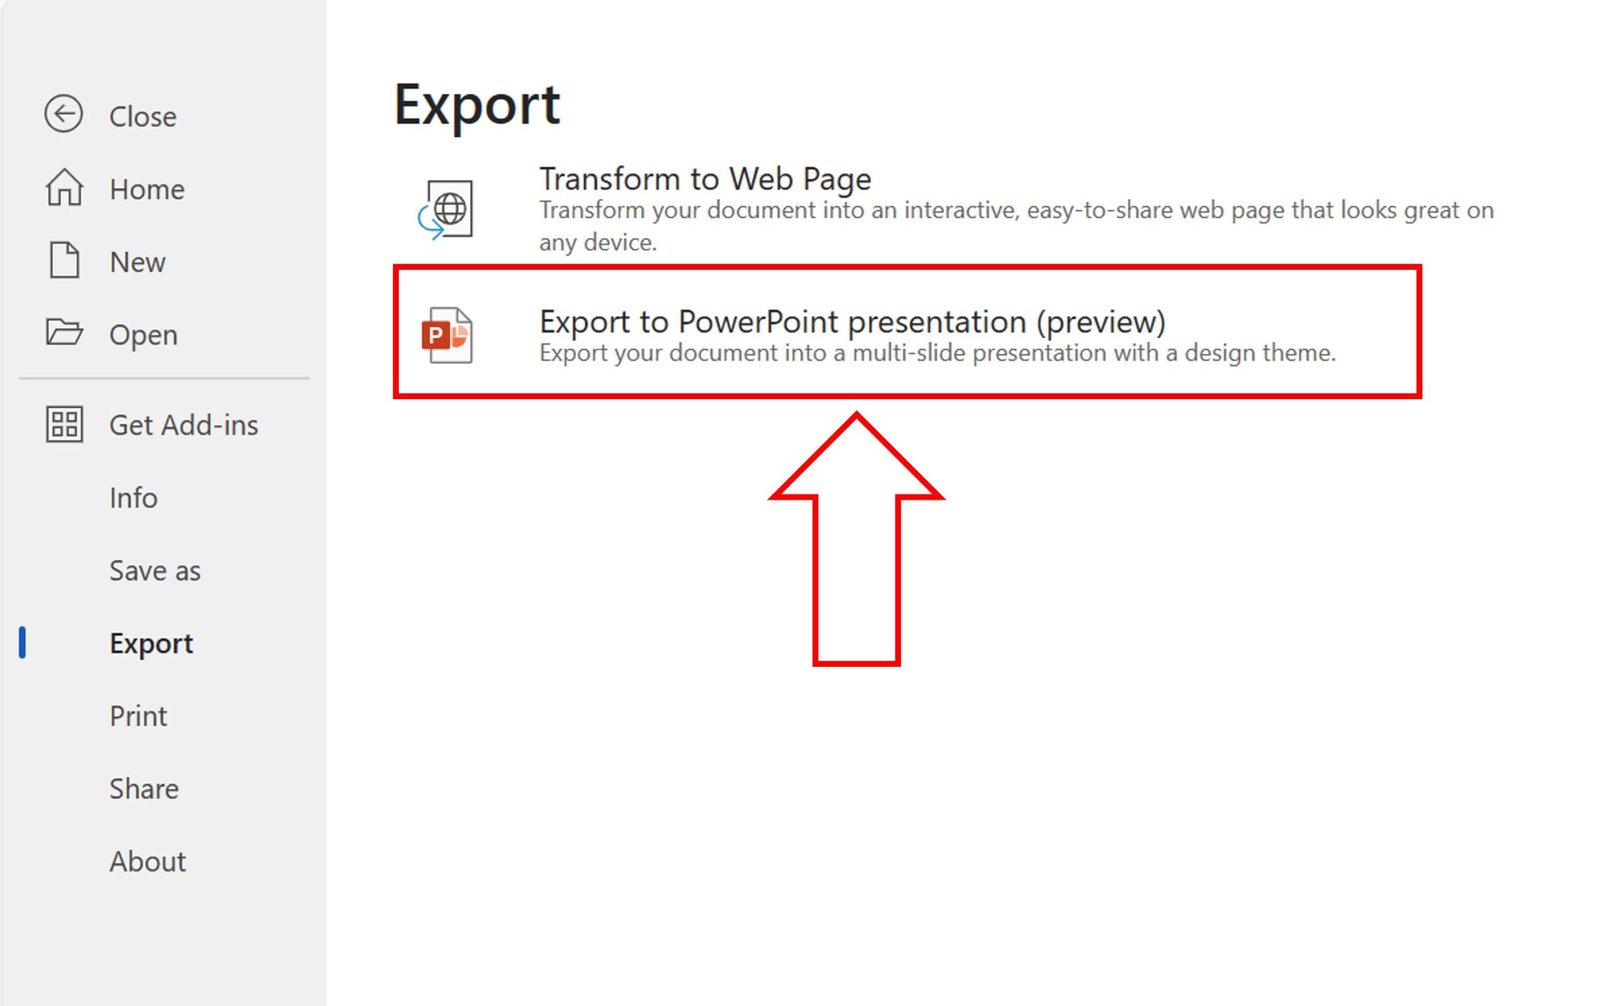 Export to PowerPoint presentation (preview)